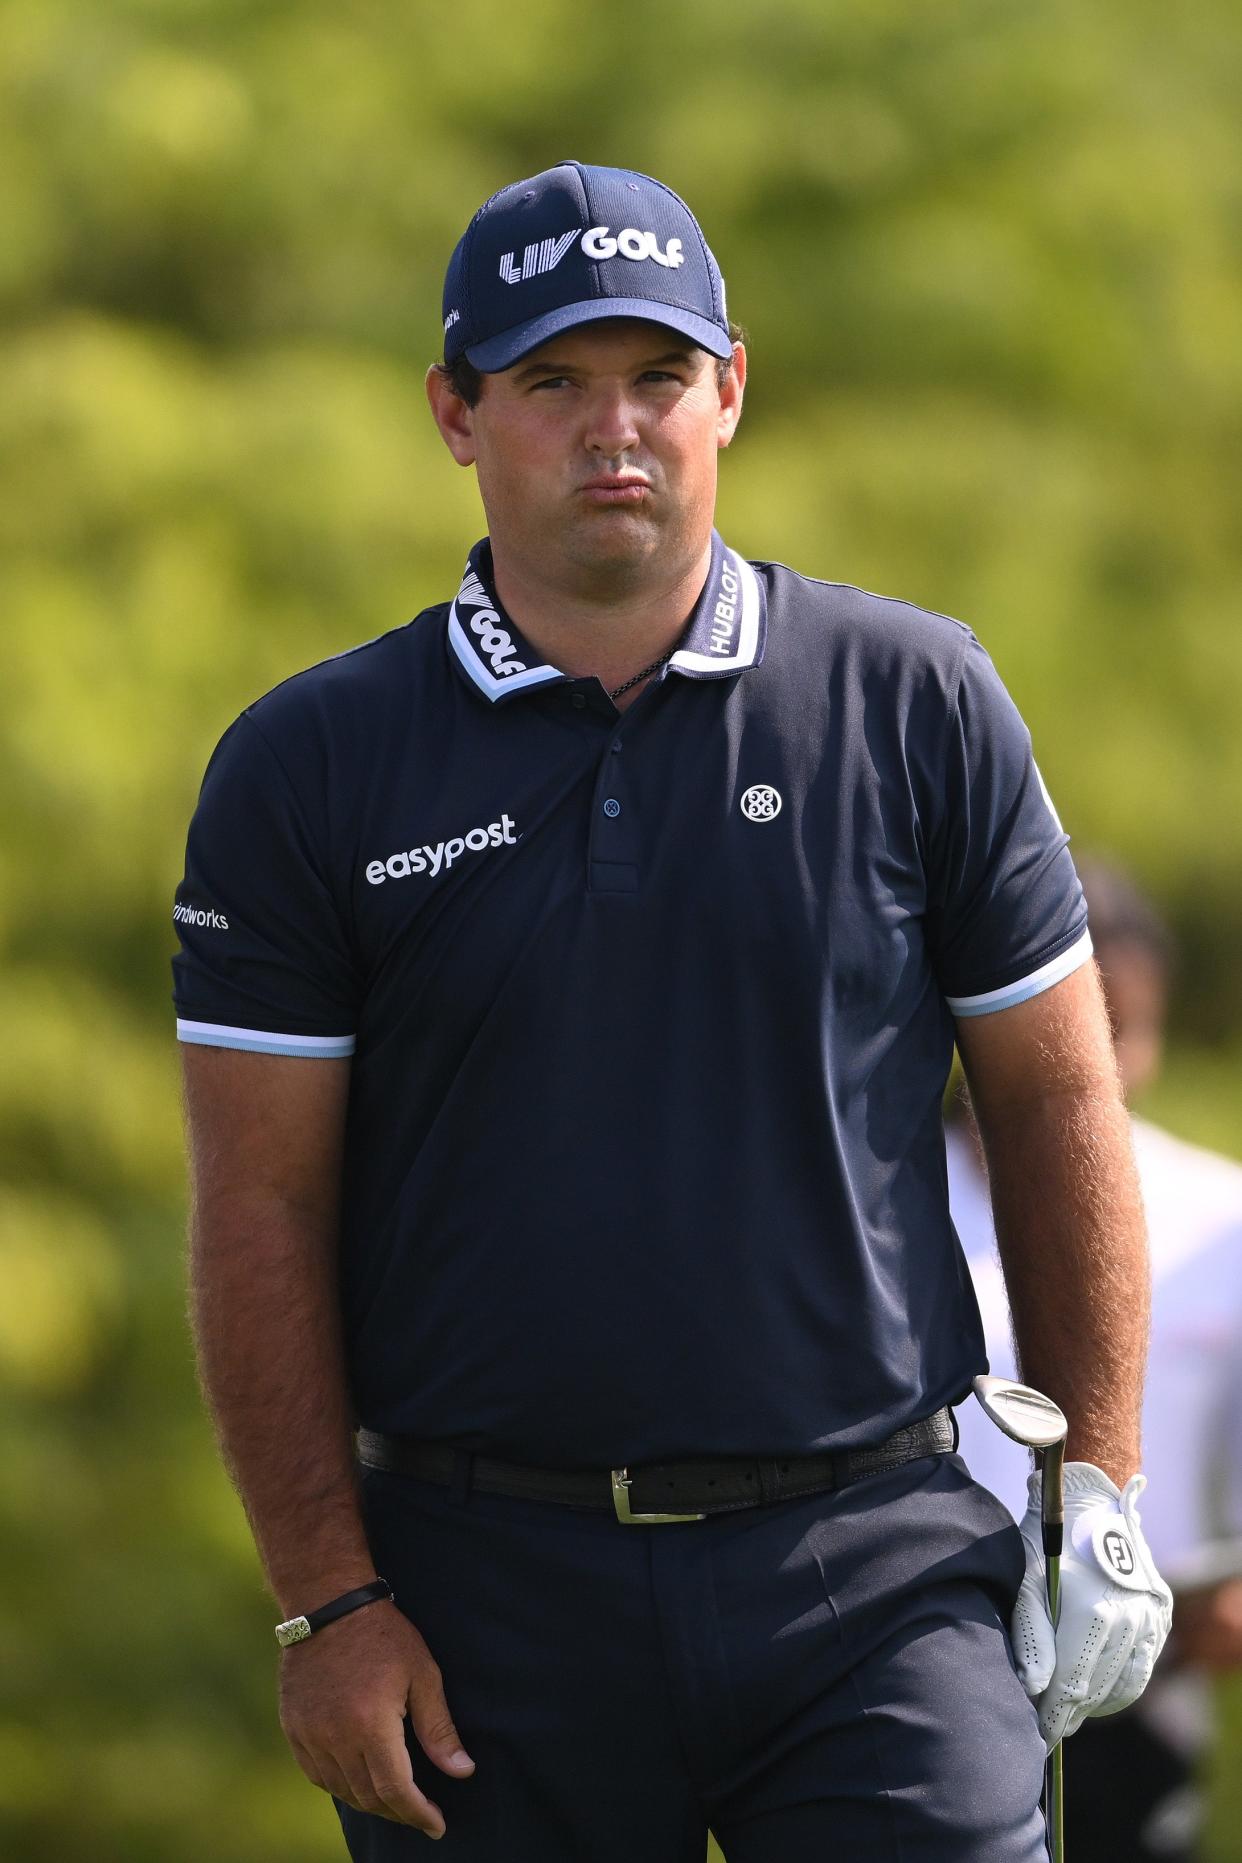 Patrick Reed of The United States reacts after chipping on the 8th hole (Getty Images)